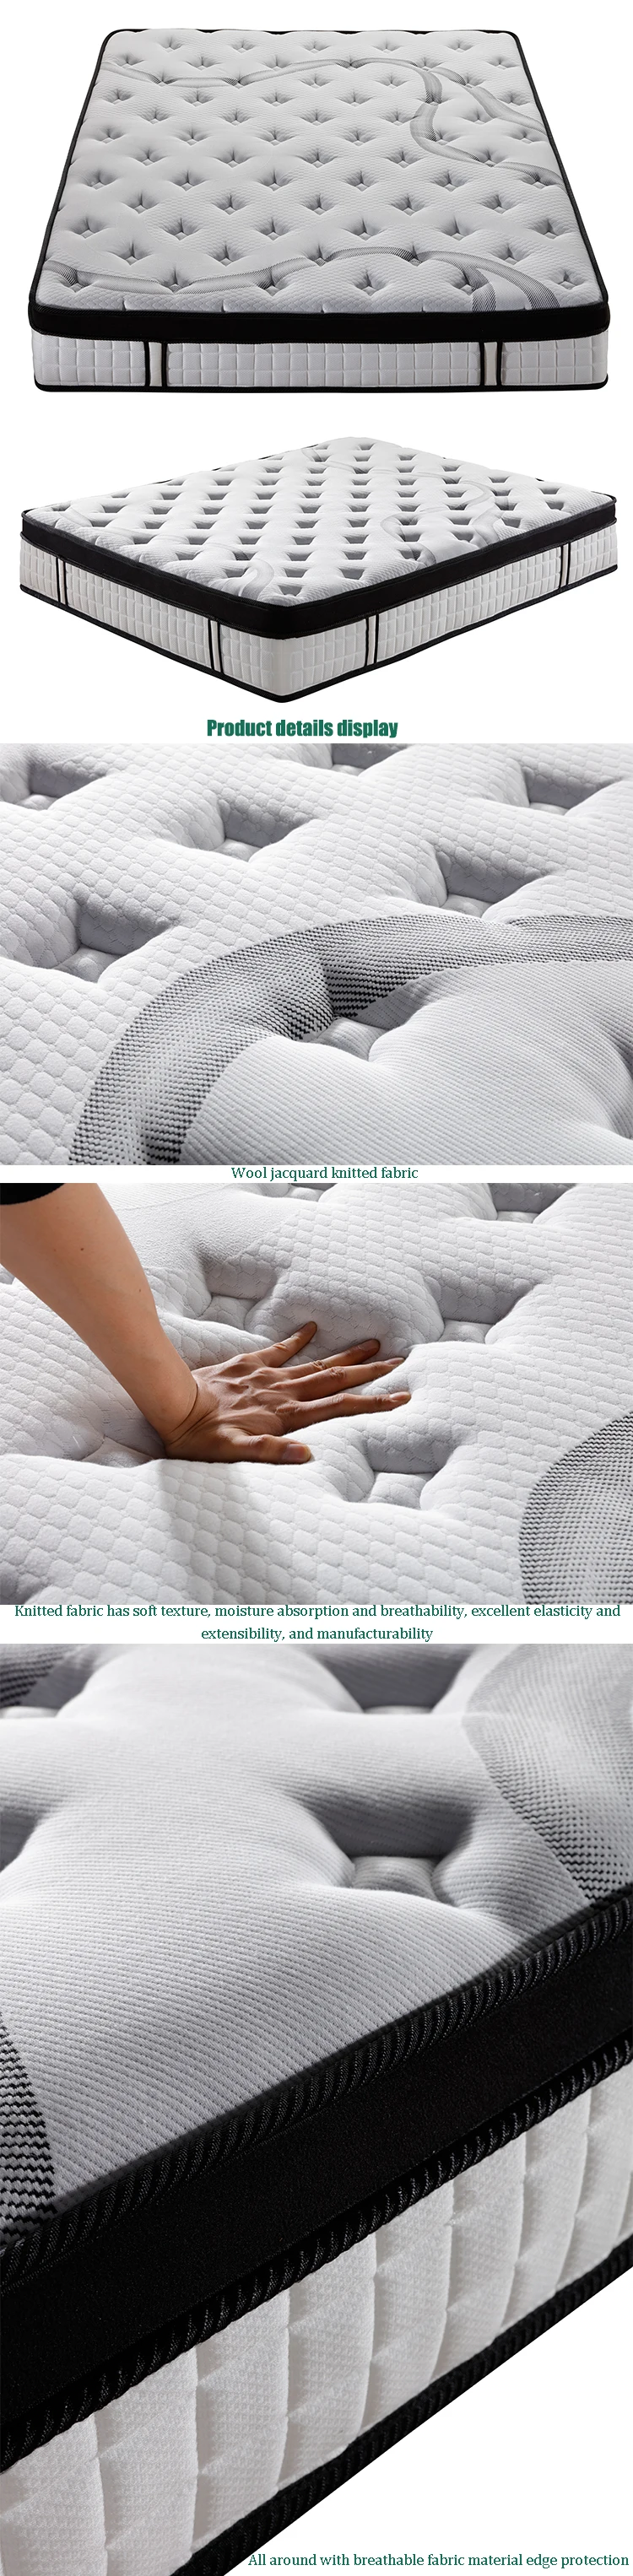 Soft comfortable mattress sizes full queen single custom size mattress topper for students